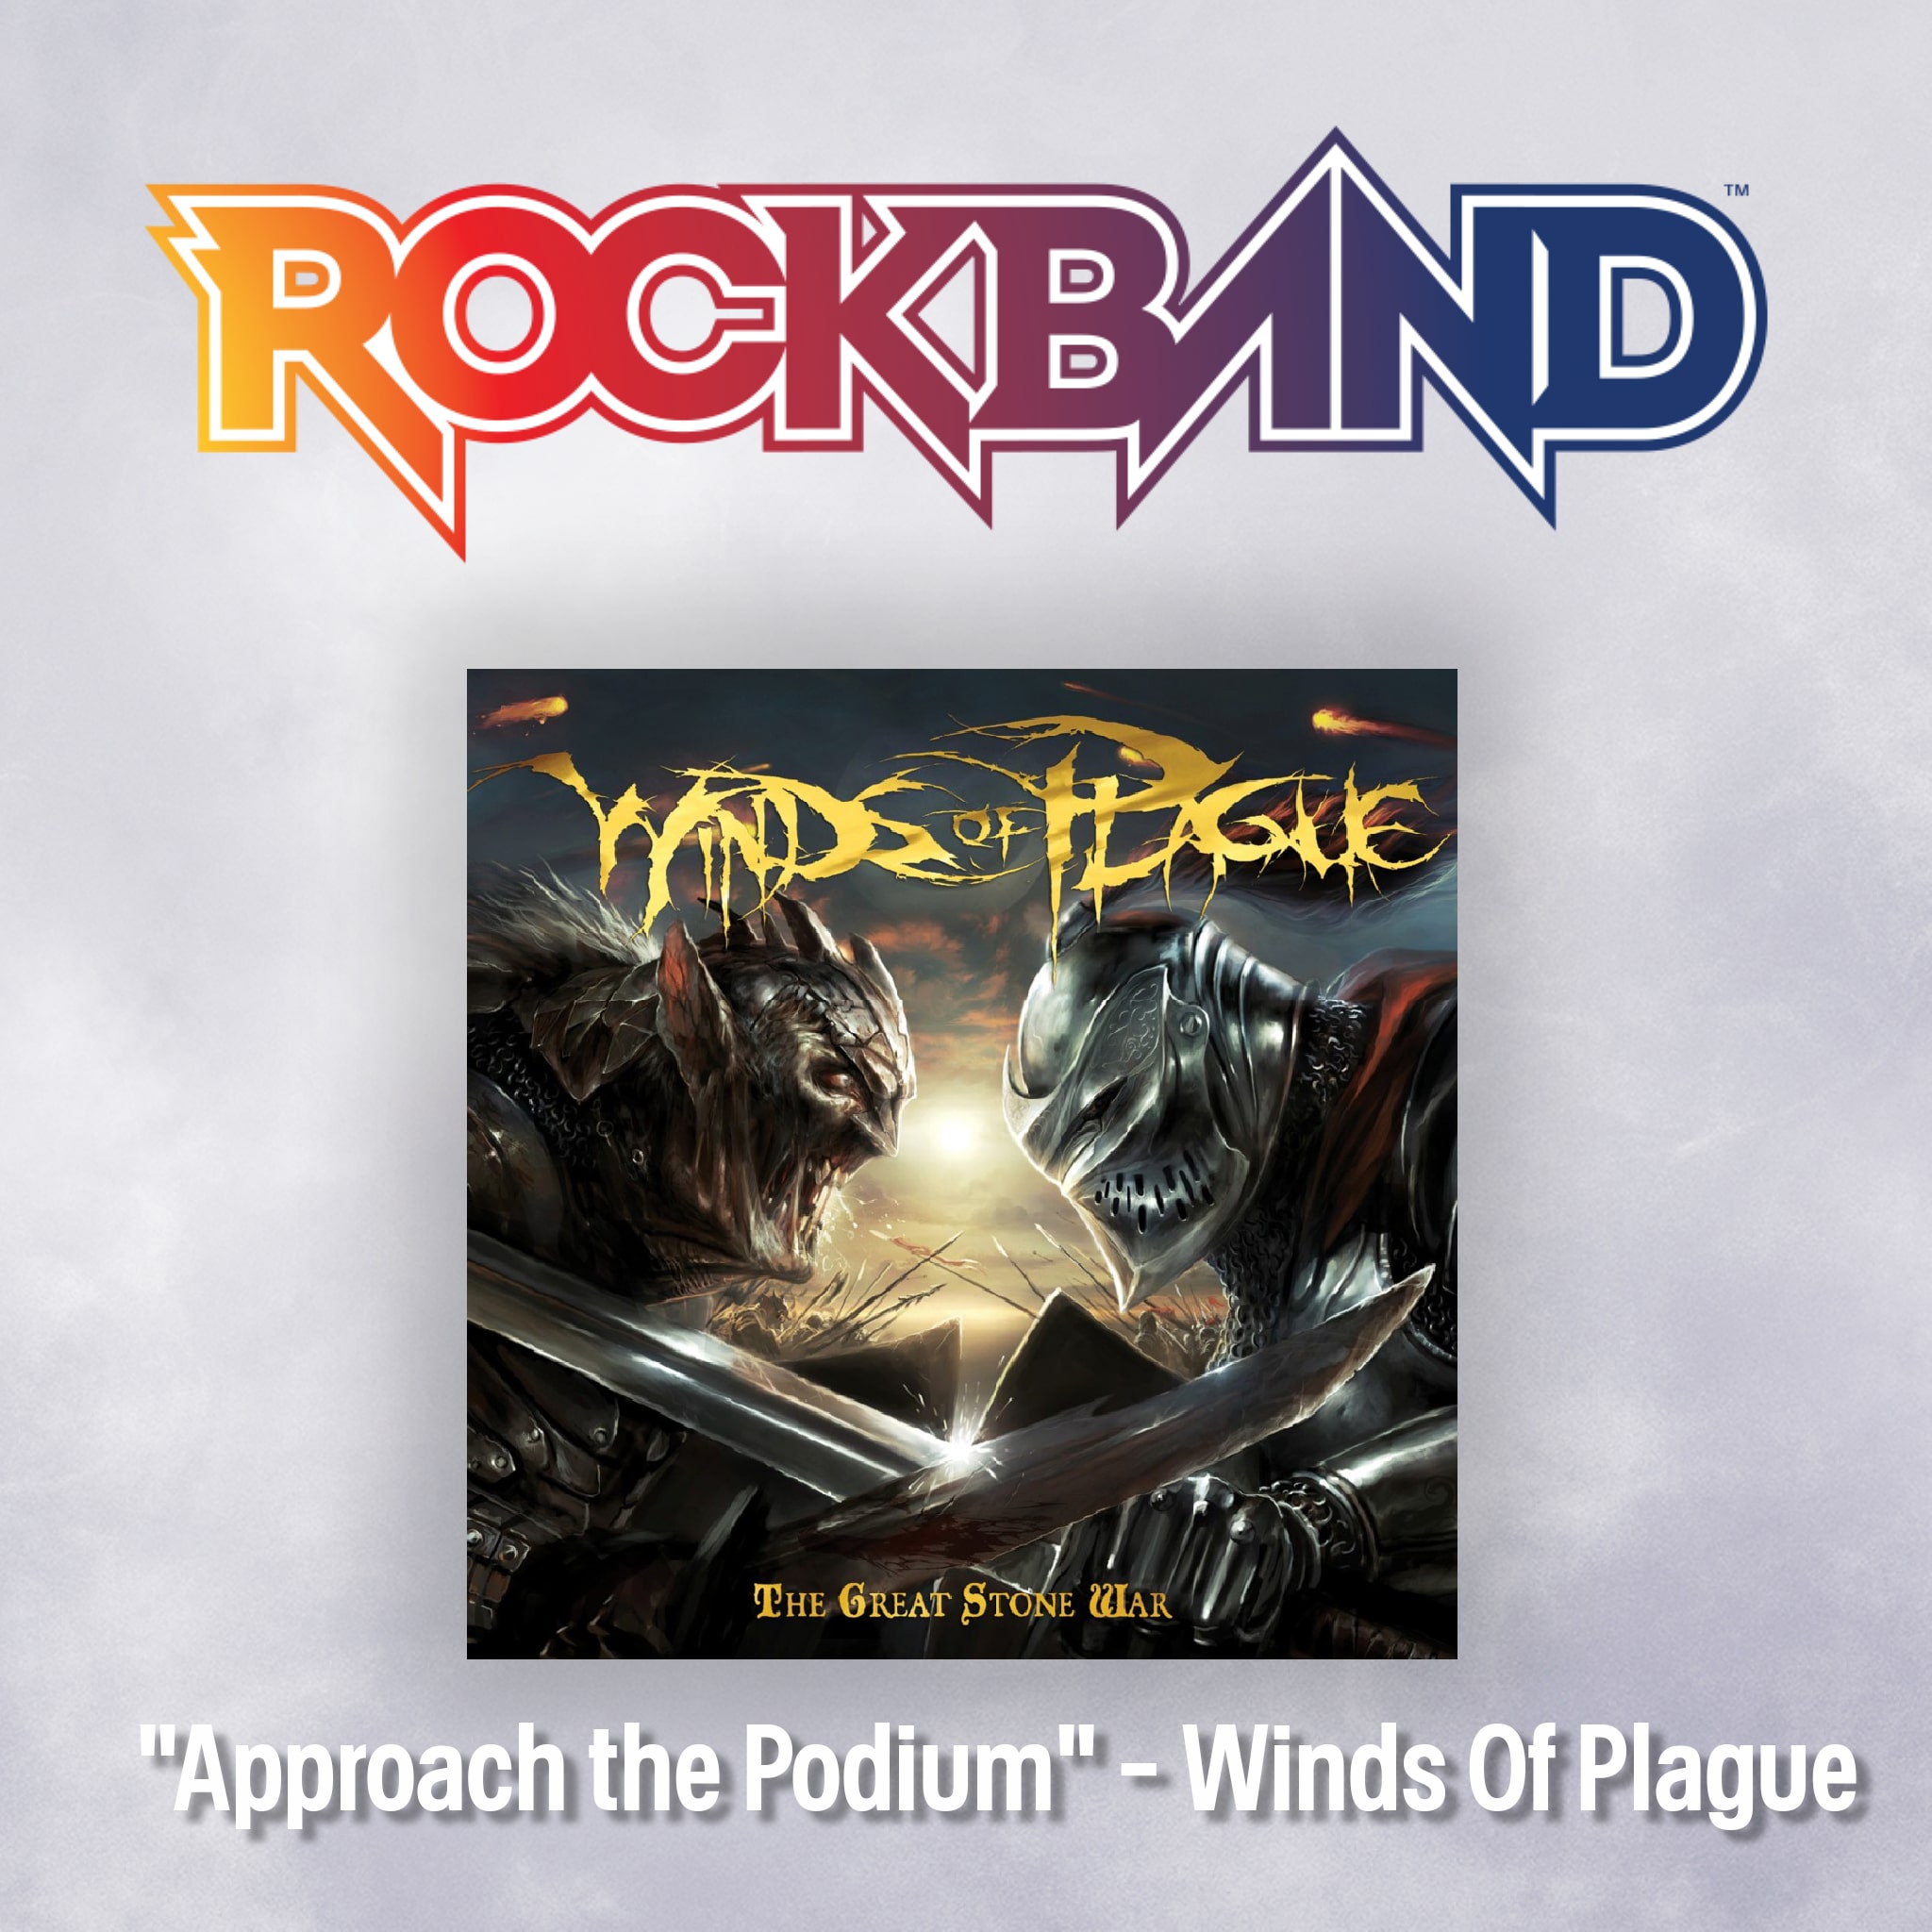  'Approach the Podium' - Winds Of Plague